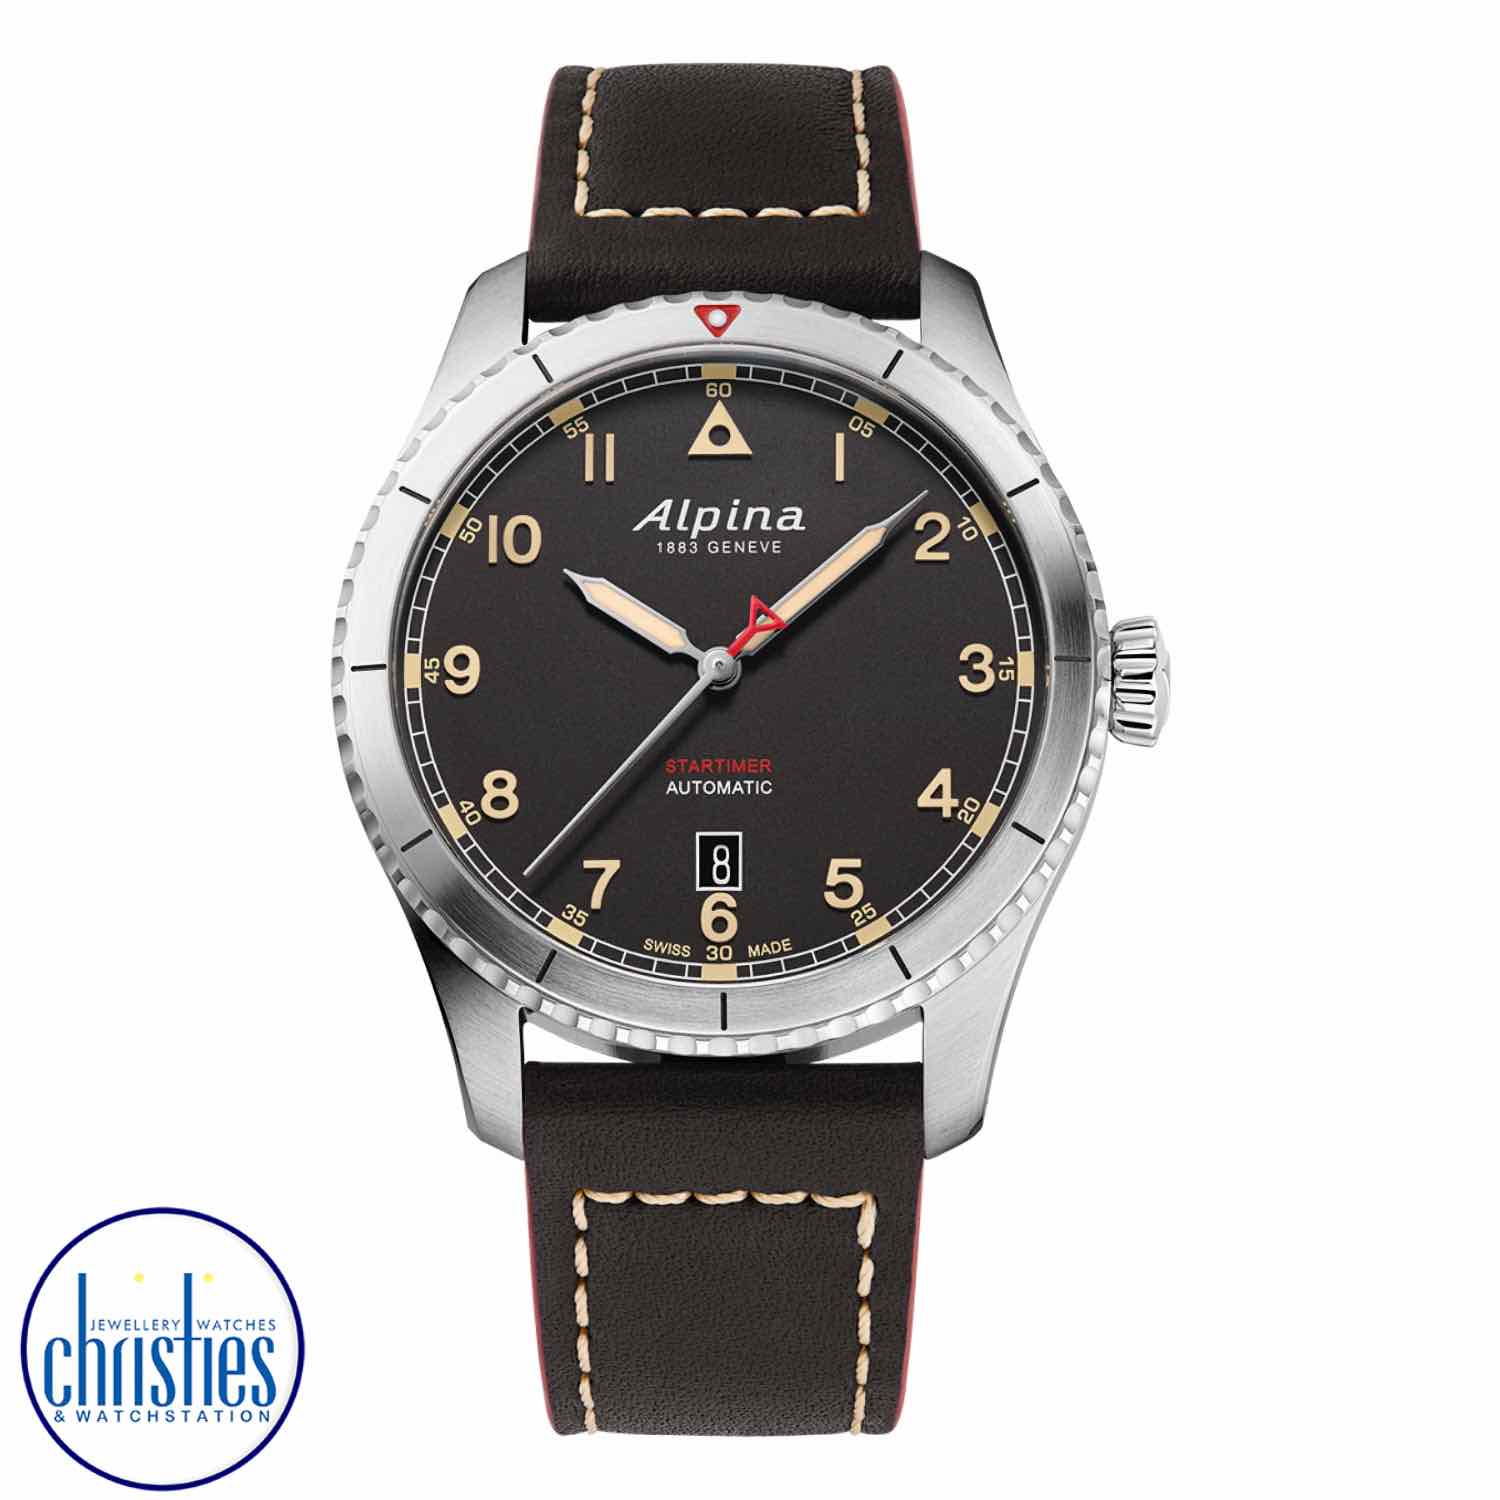 Alpina Startimer Pilot Automatic Black AL-525BBG4S26. From the very beginning, as far back as 1883, Alpina has been associated with horological innovation.